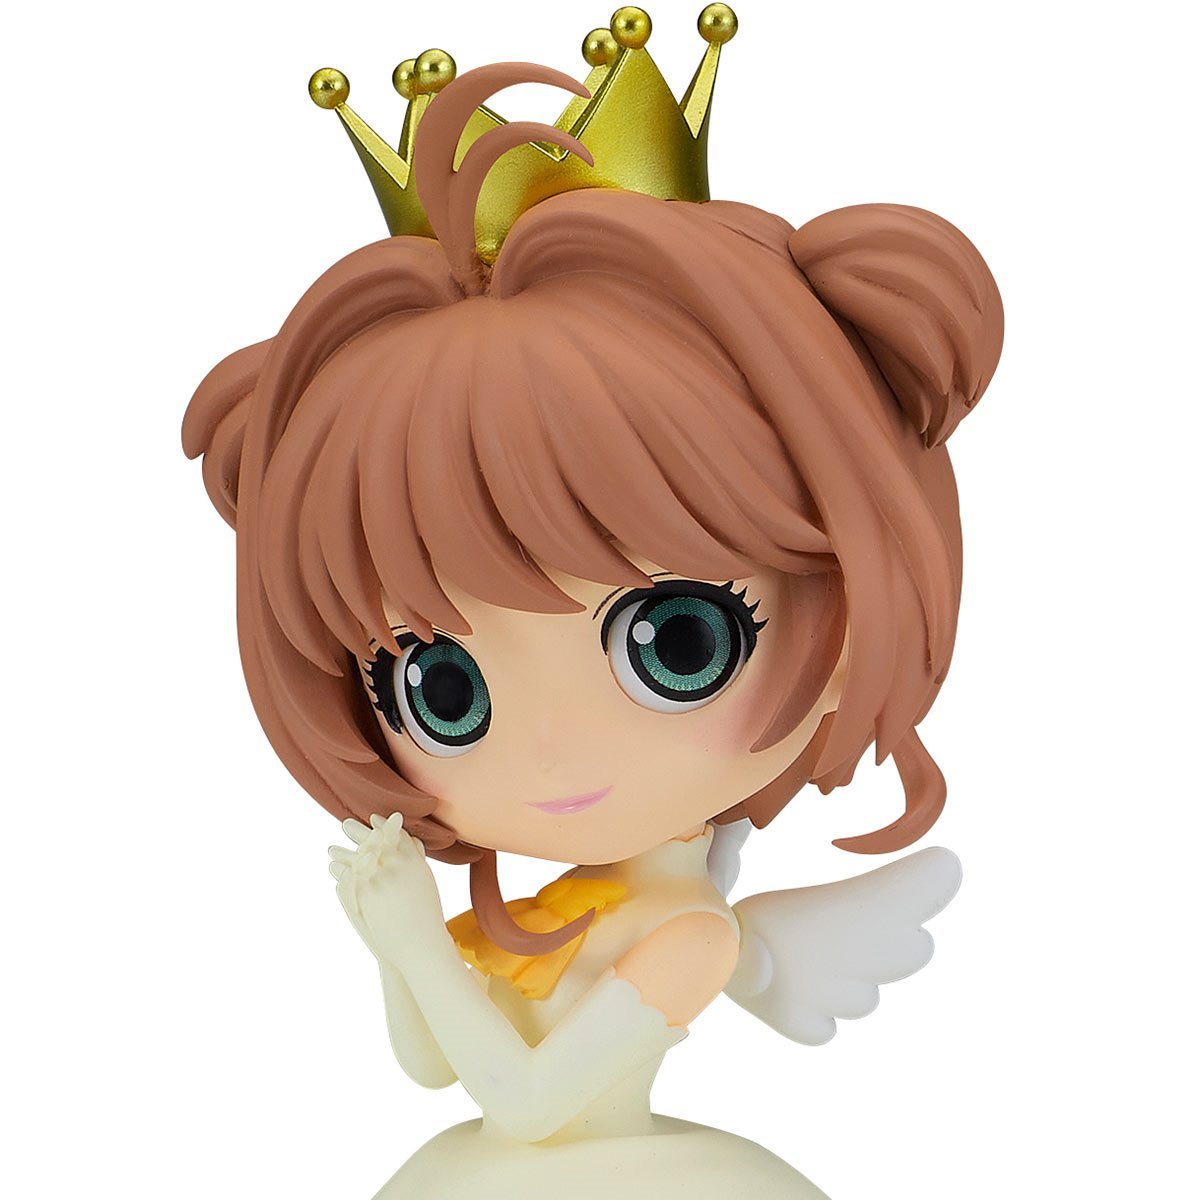 Cardcaptor Sakura Clear Card Series Vol. 1 First Specification Edition Ship  for sale online